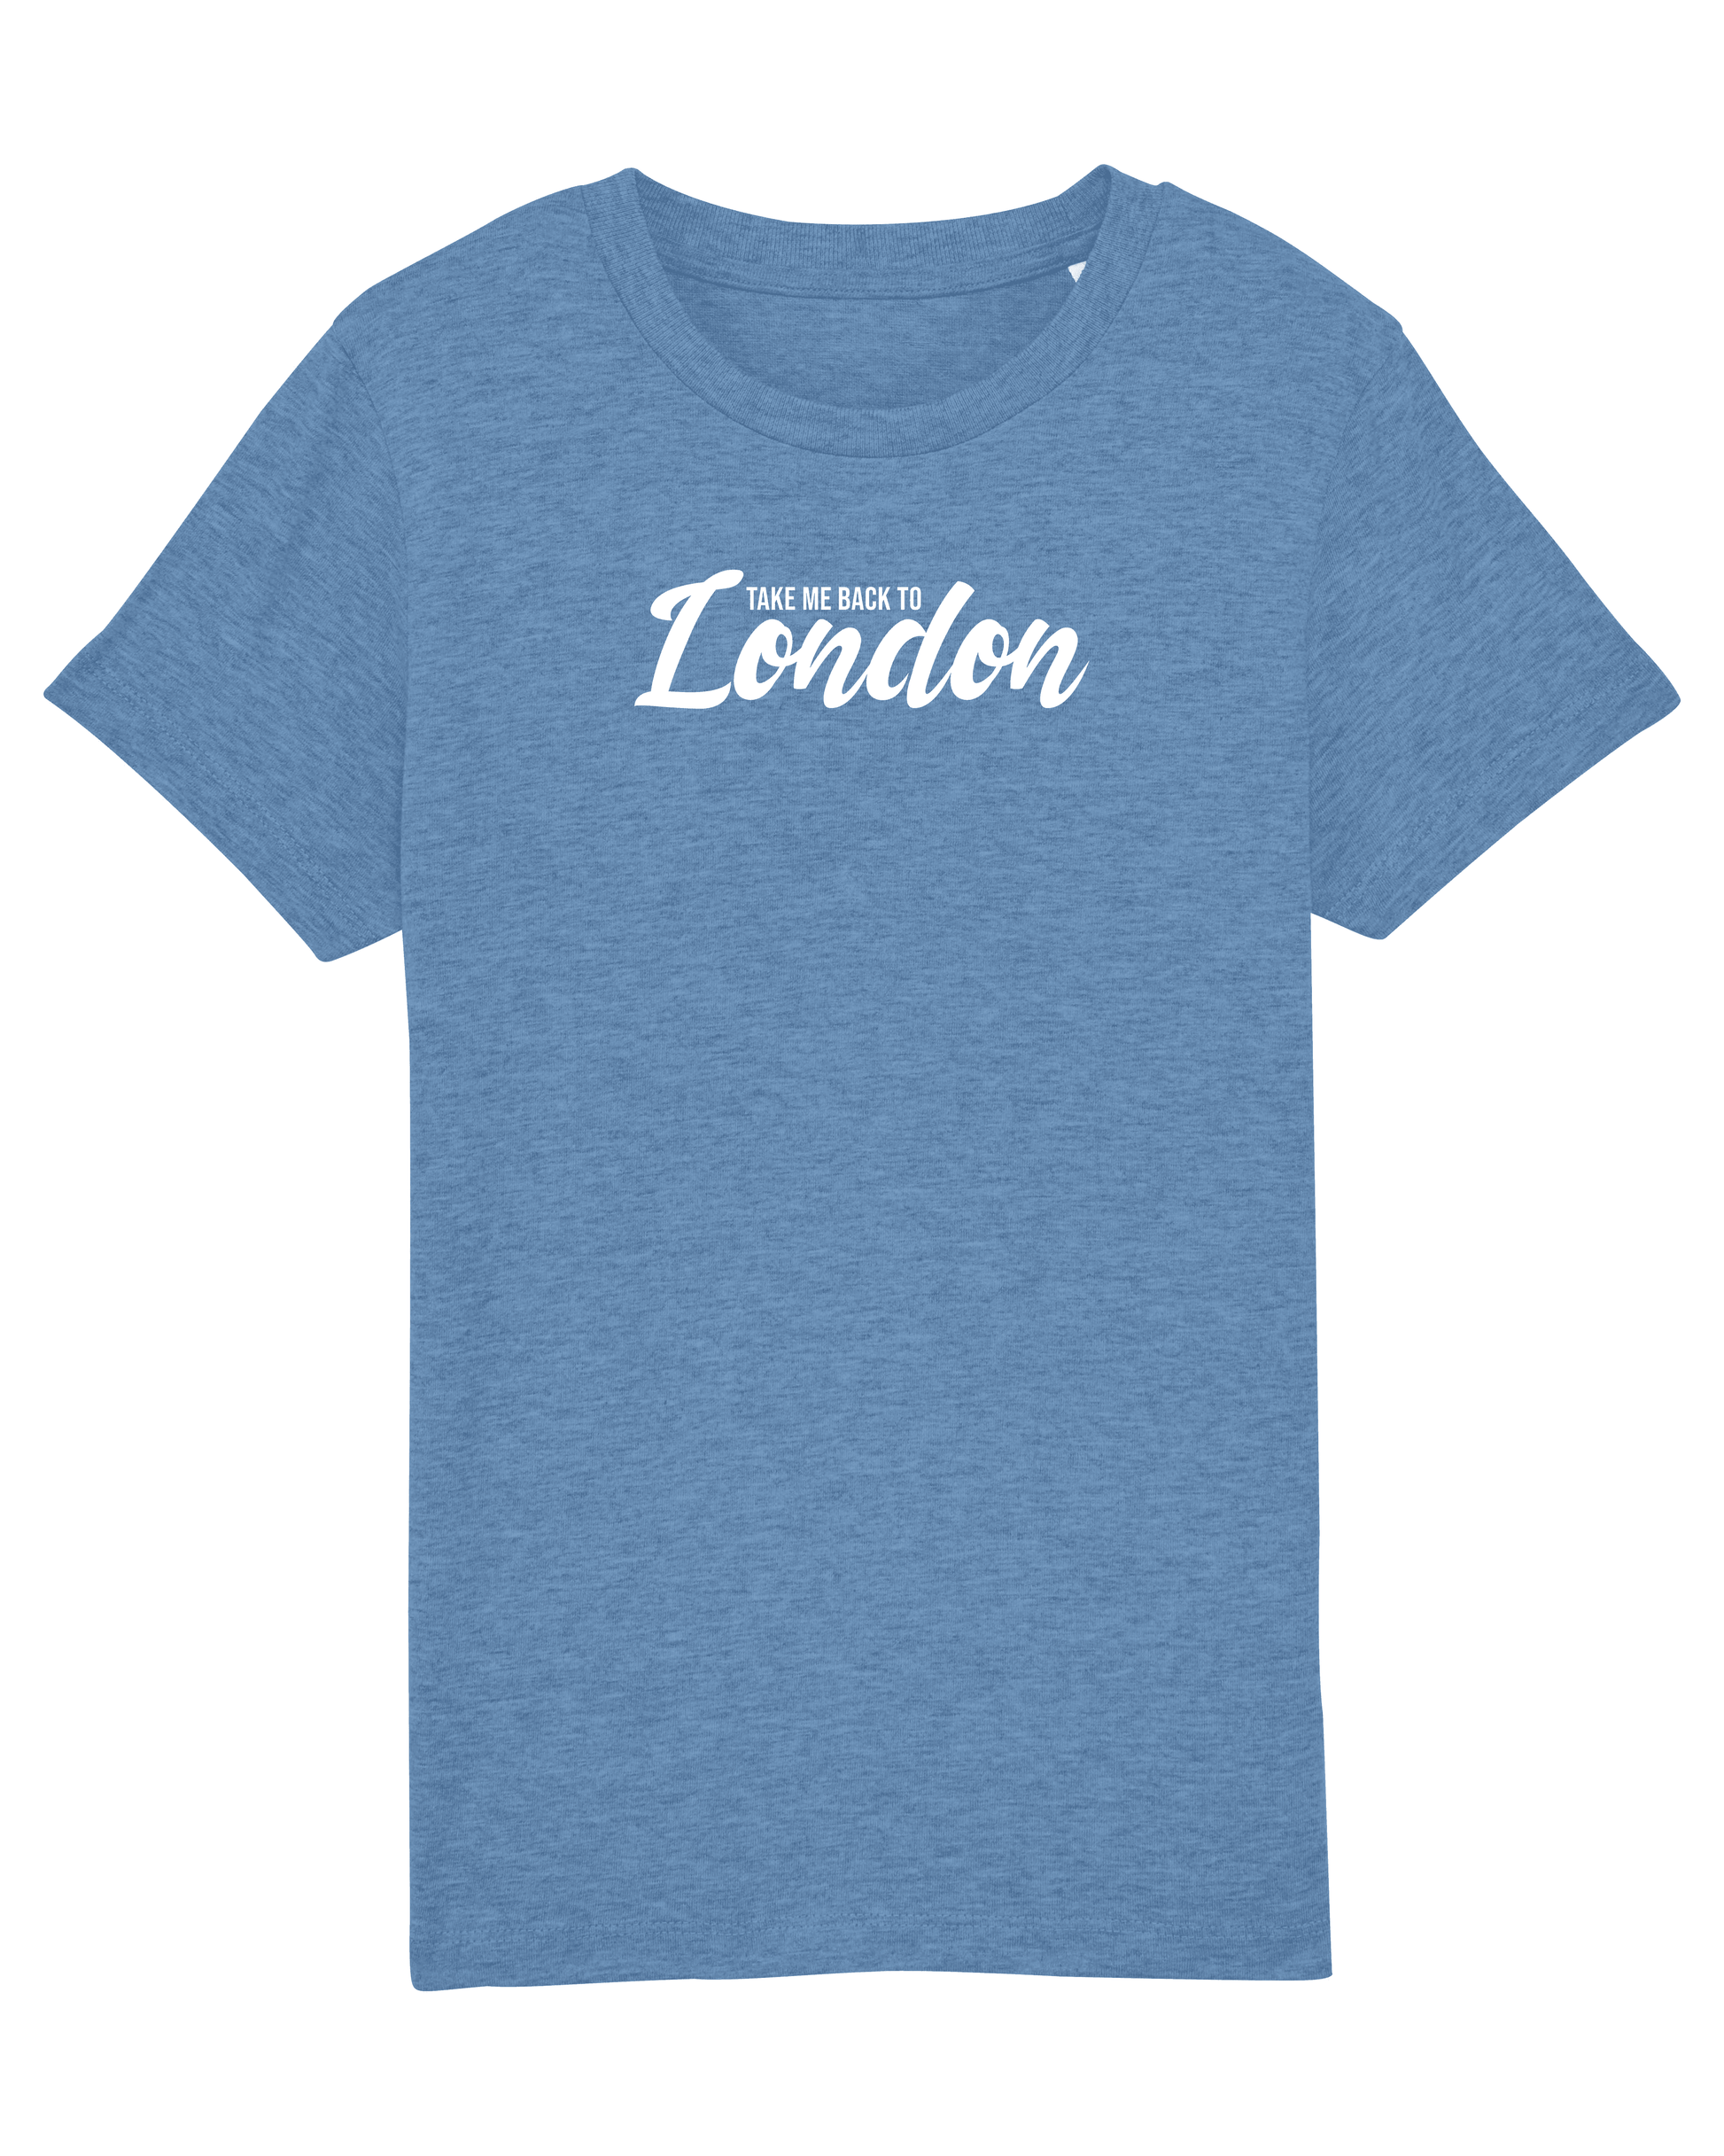 TAKE ME BACK TO LONDON - Toddler and Youth T-Shirt - Little Mate Adventures